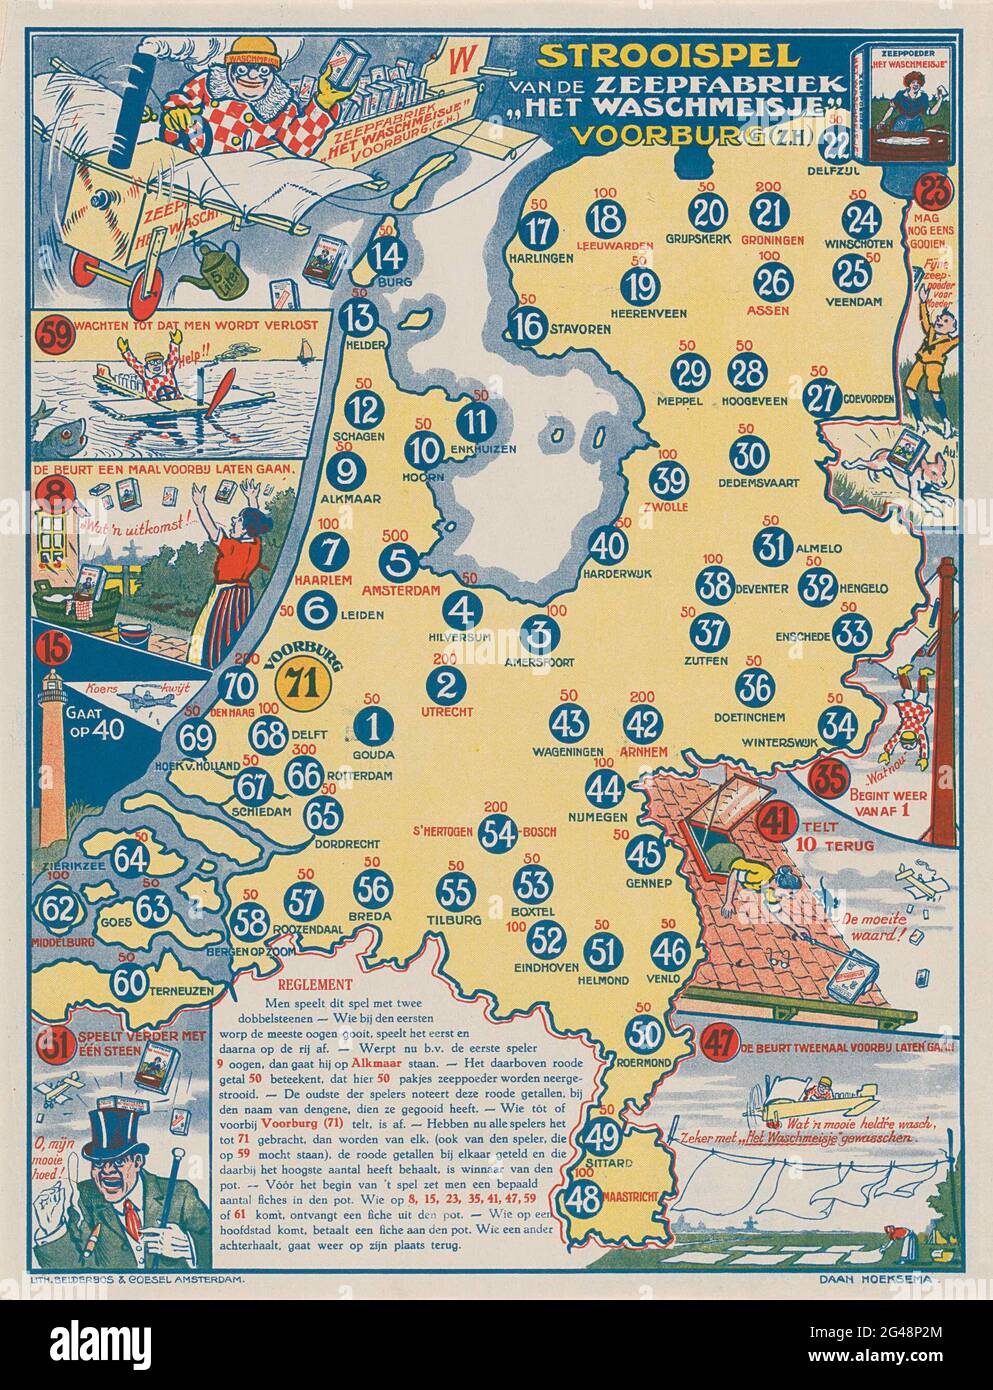 Sprinkling of the soap factory 'the Wasch girl' Voorburg. Board game of the soap factory 'the Wasch girl' in Voorburg. The map of the Netherlands with 71 numbered with laps and place names. Rules of the bottom left. Stock Photo